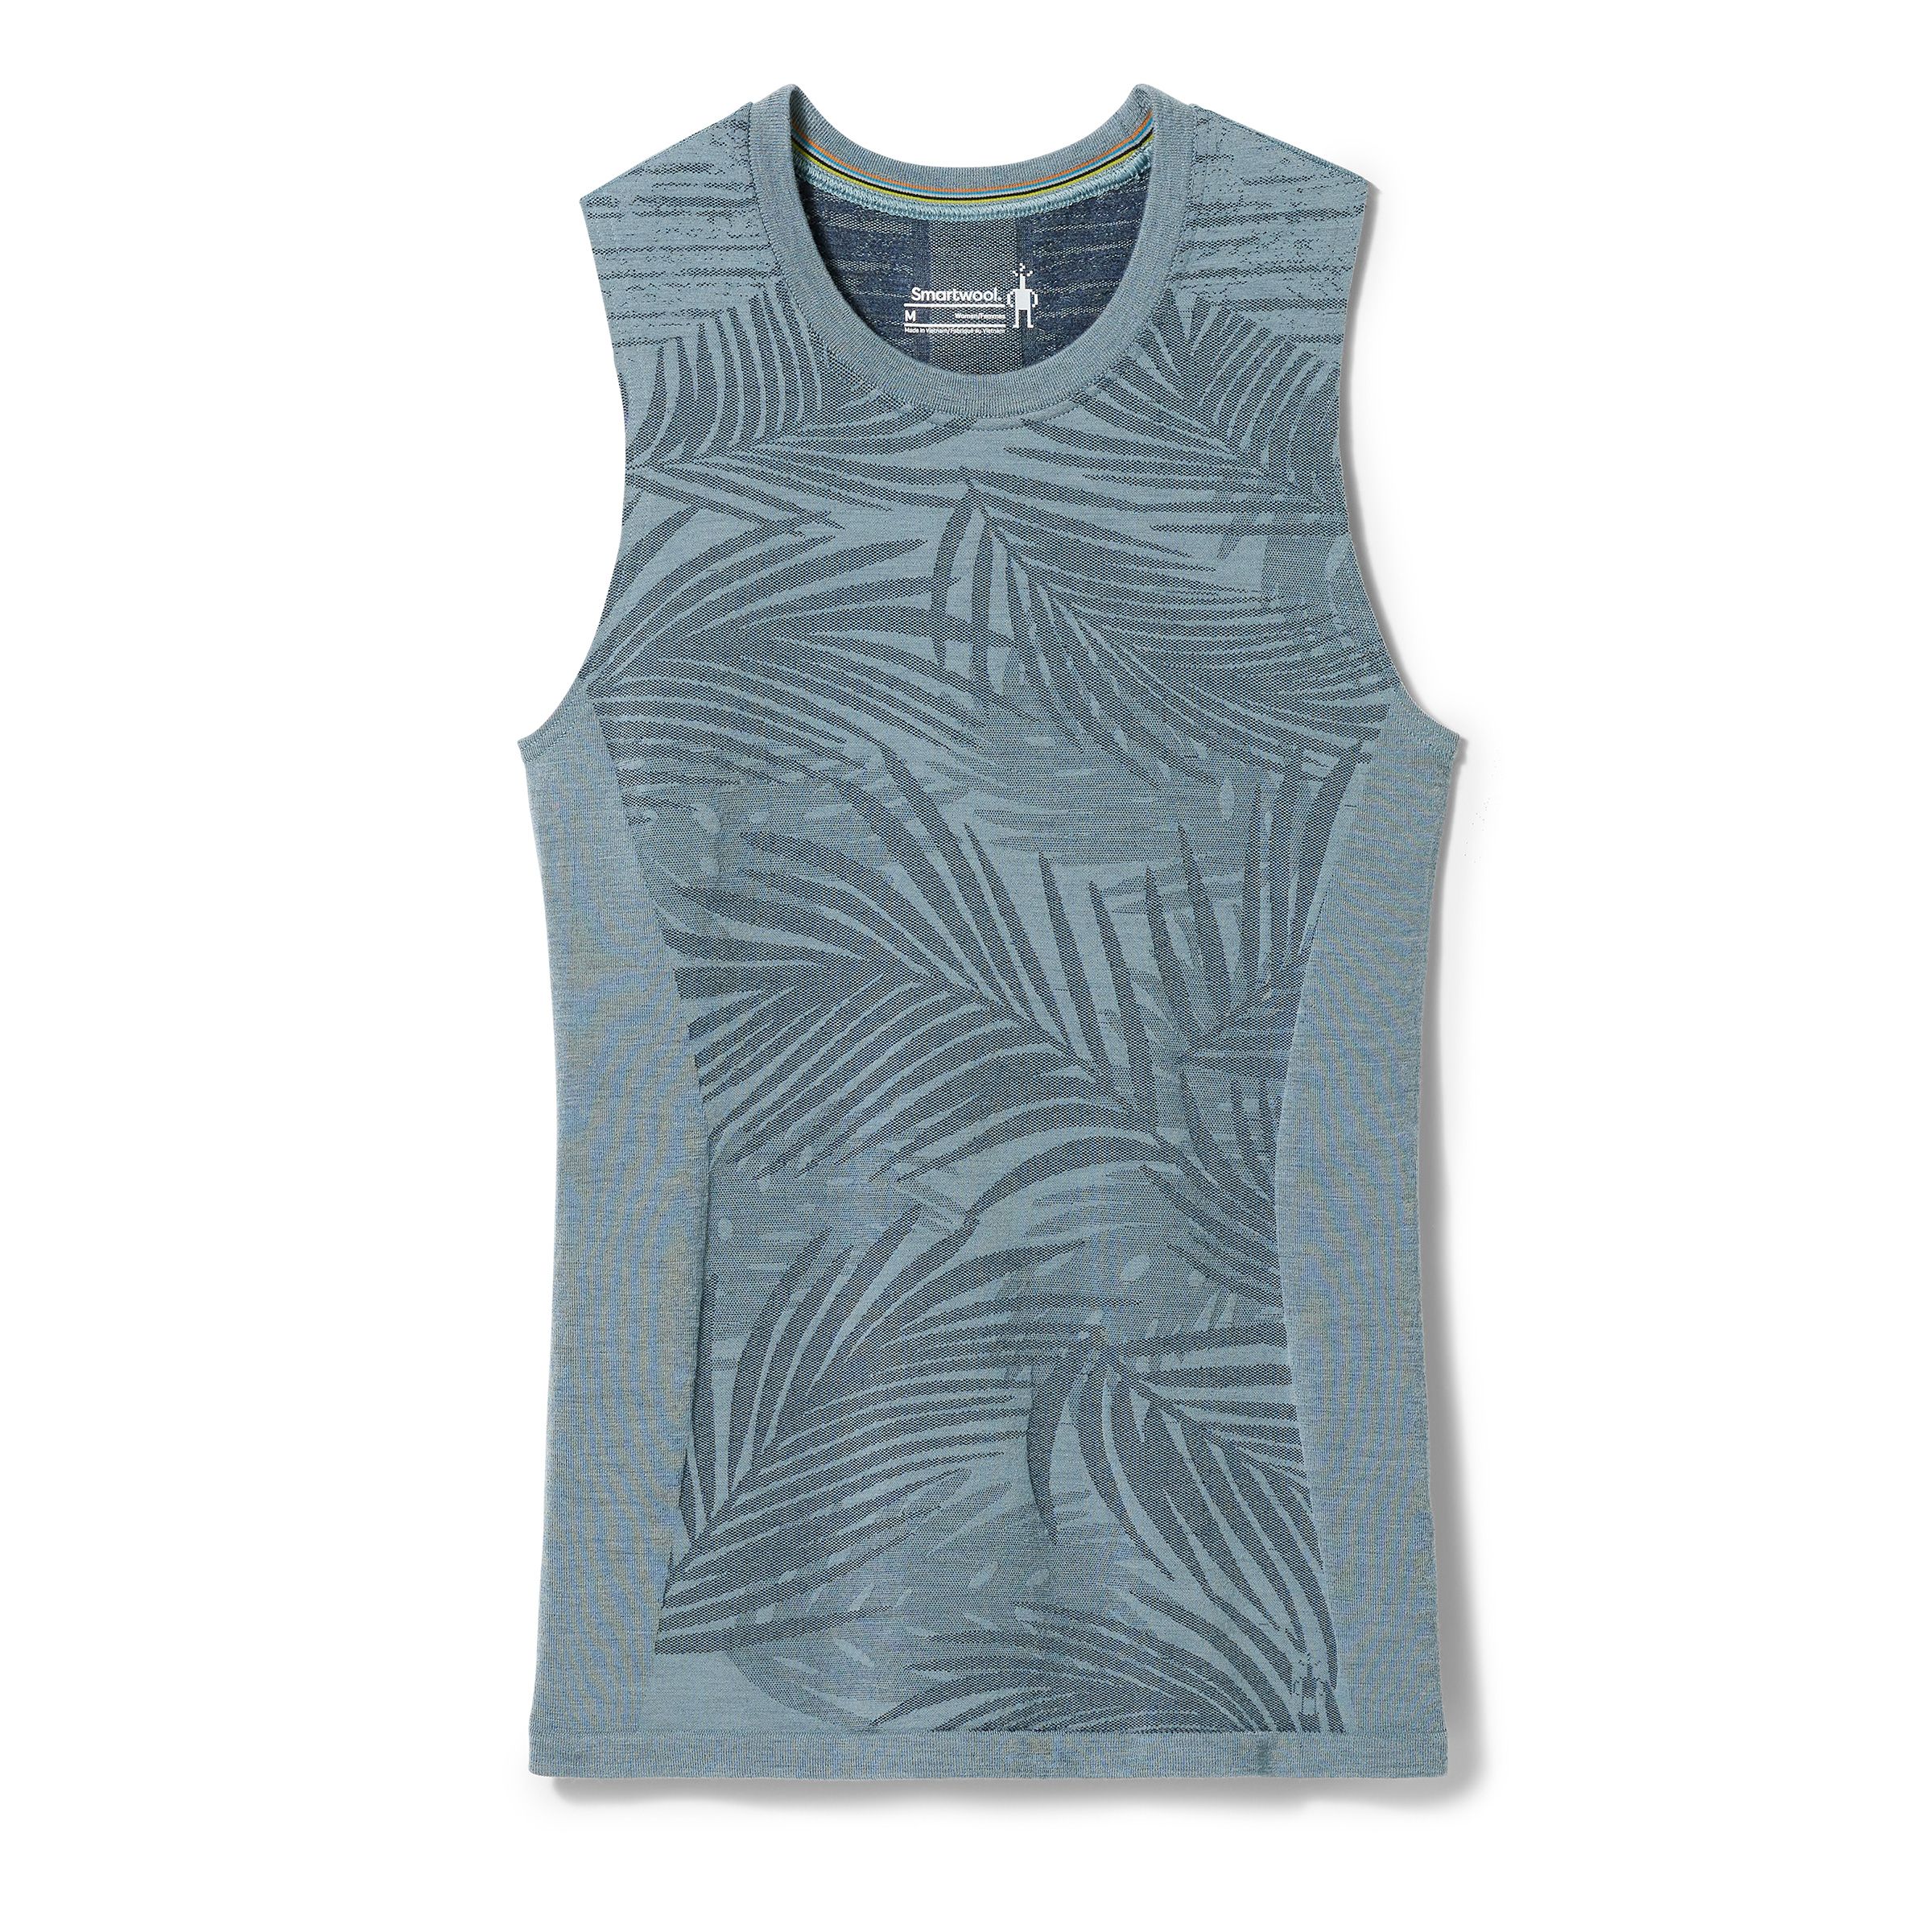 Women's Active Tops, Workout Tops + Tanks